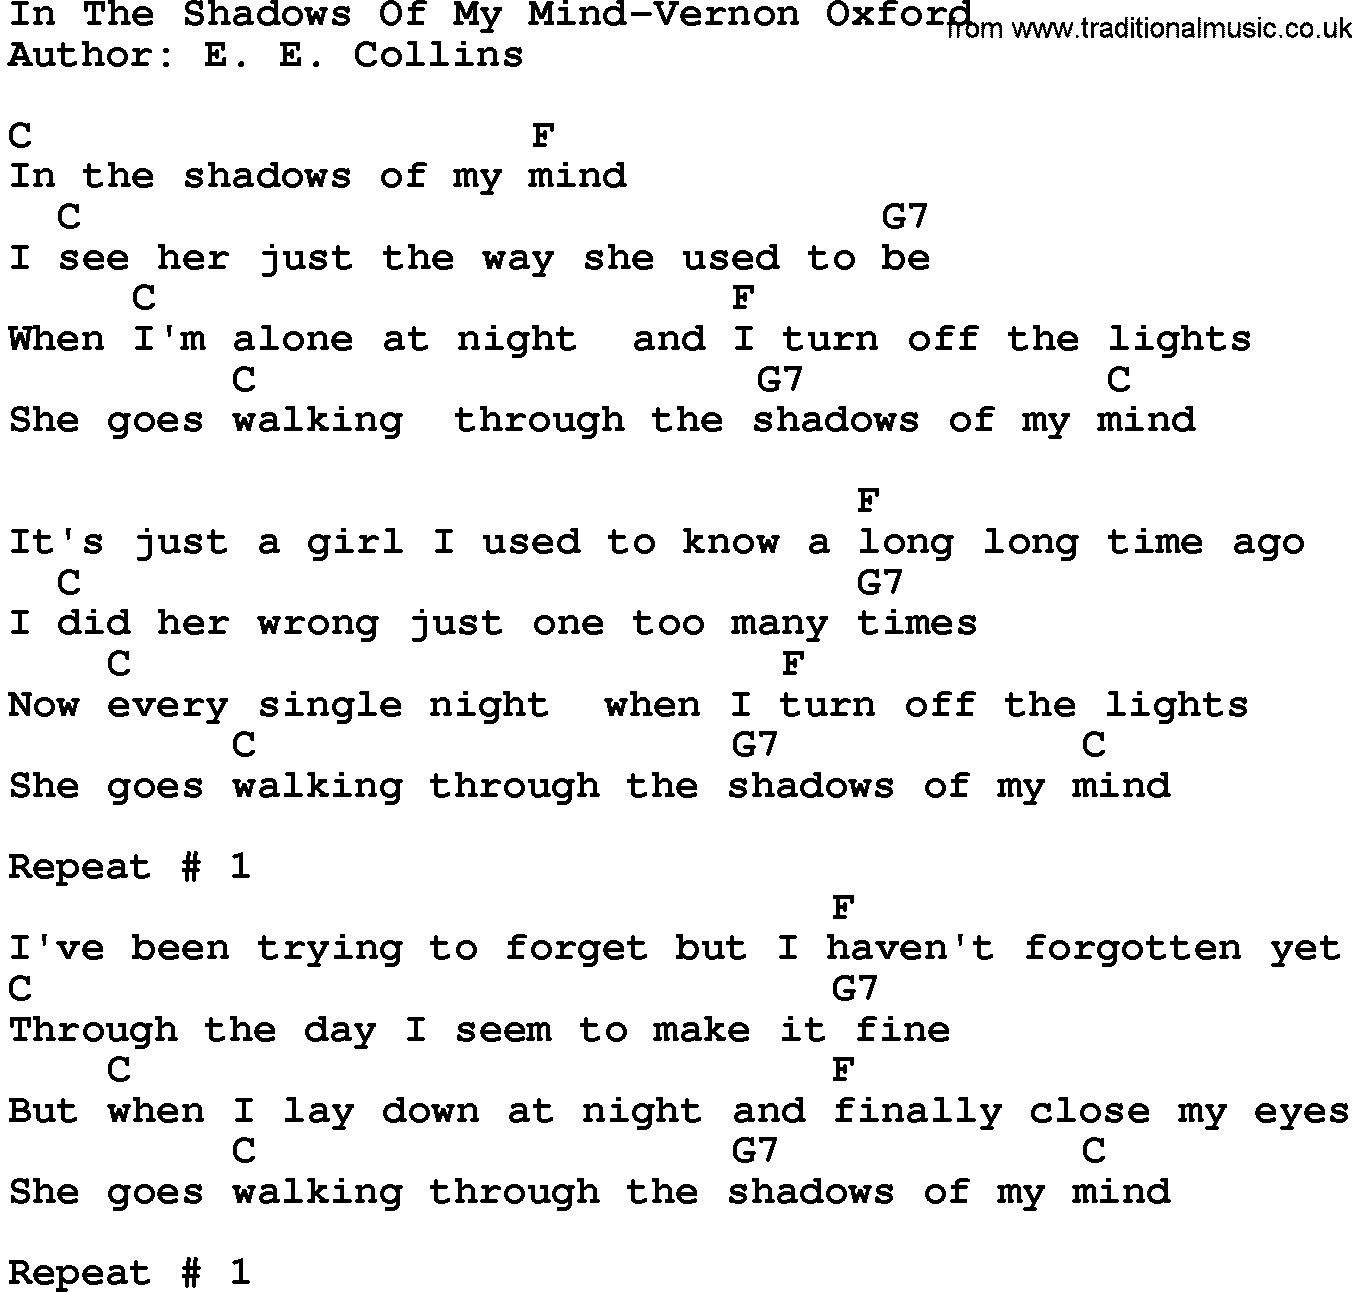 Country music song: In The Shadows Of My Mind-Vernon Oxford lyrics and chords